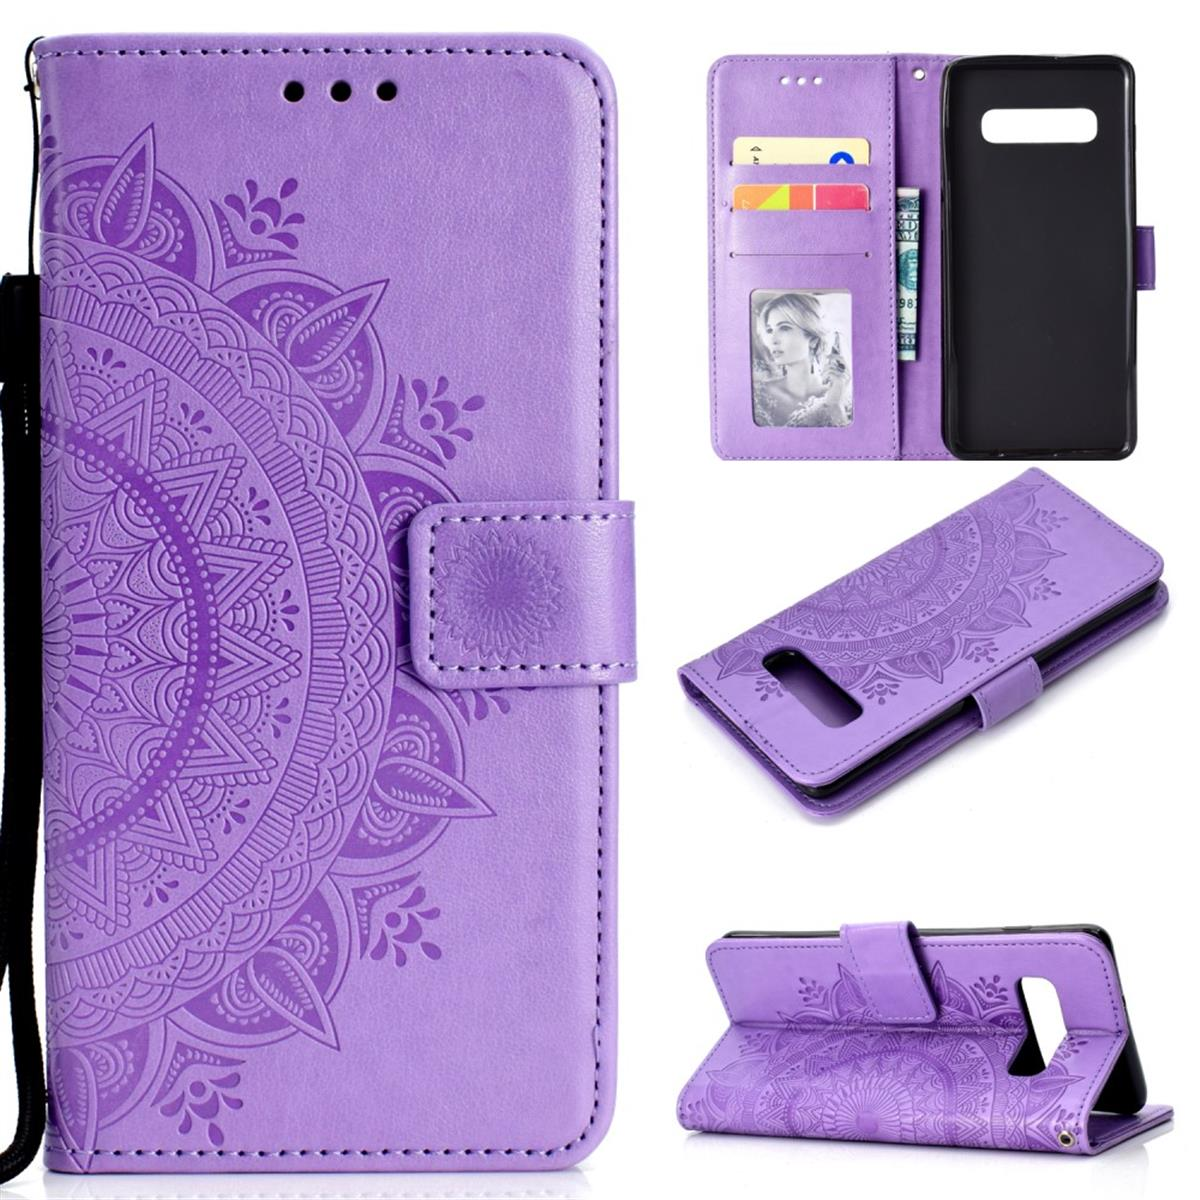 COVERKINGZ Klapphülle Muster, Mandala mit Lila S10, Bookcover, Galaxy Samsung